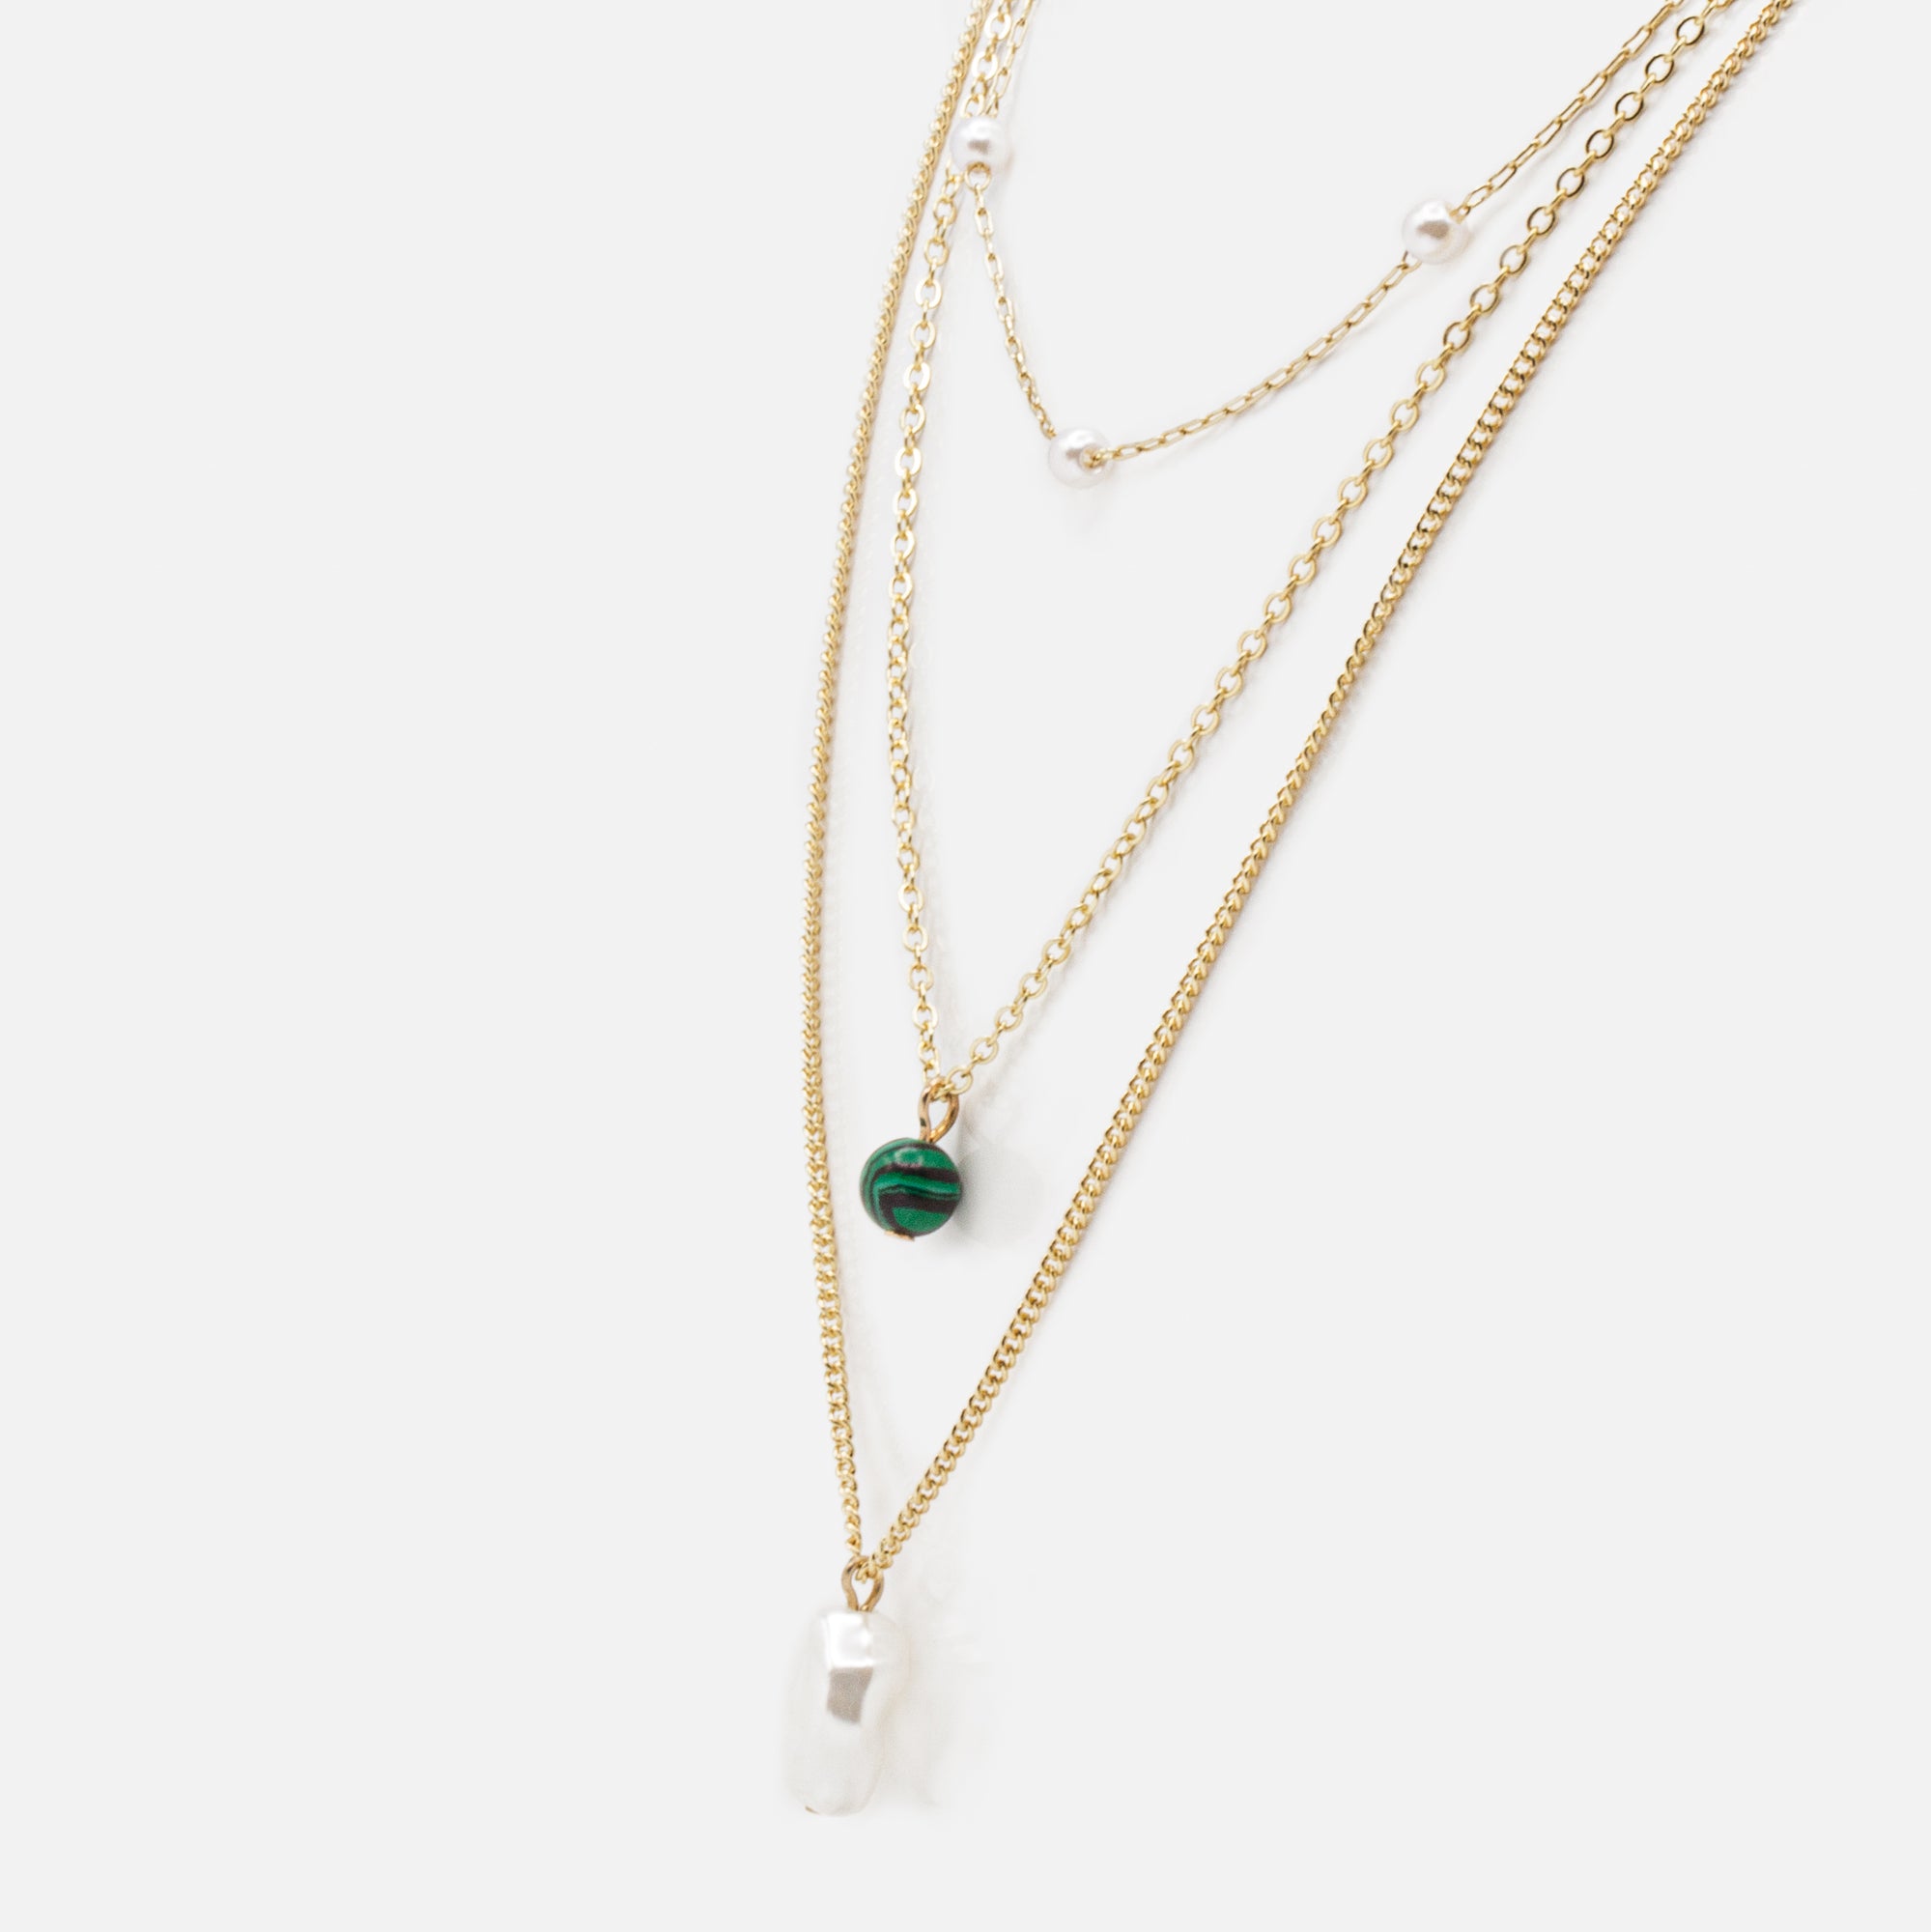 Gold triple chain necklace with flat pearl and zebra green bead pendants